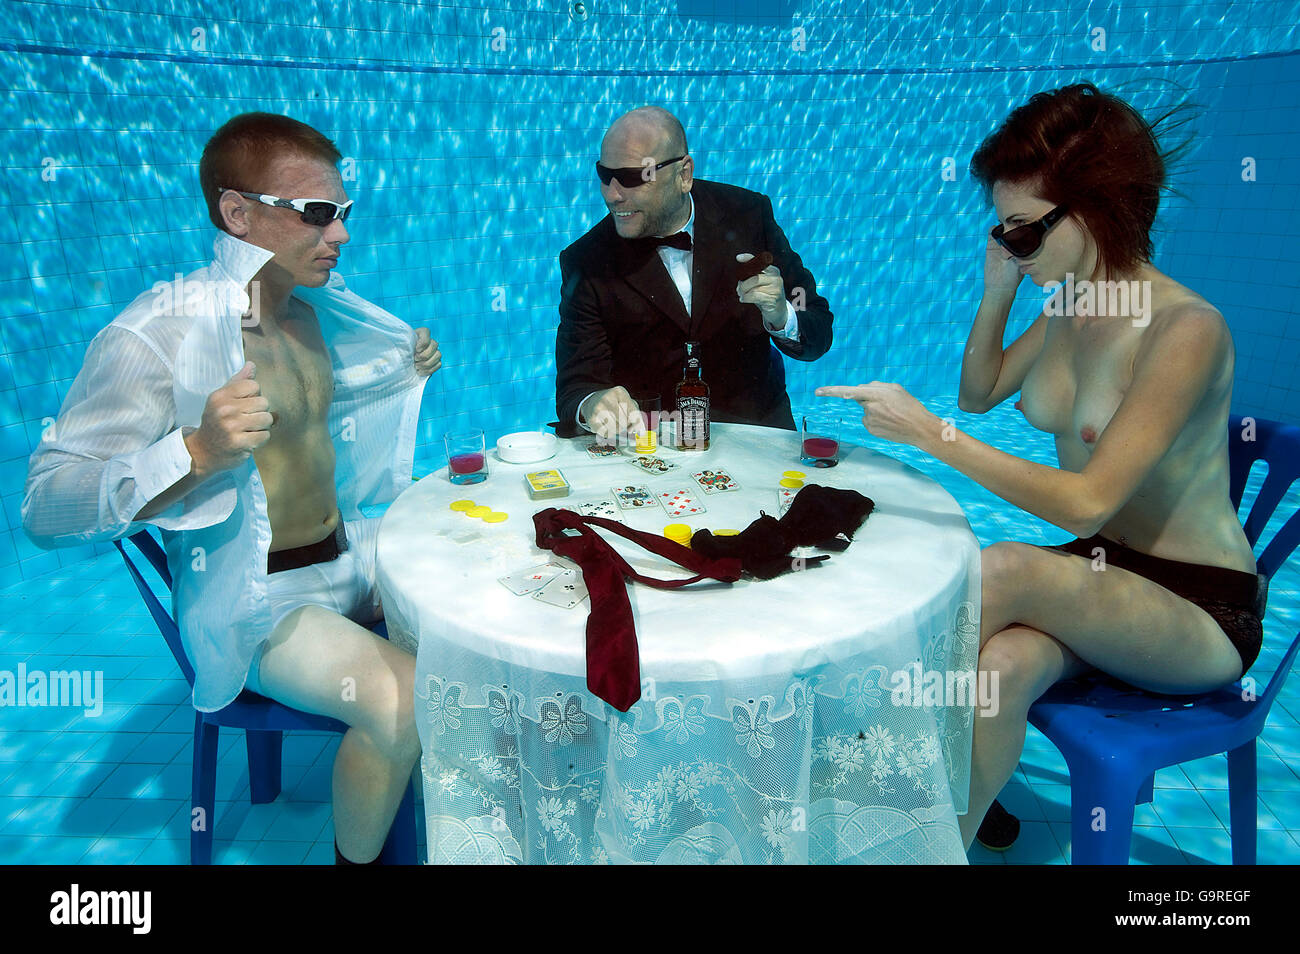 Strippoker, card game, under water, in swimming pool / poker Stock Photo